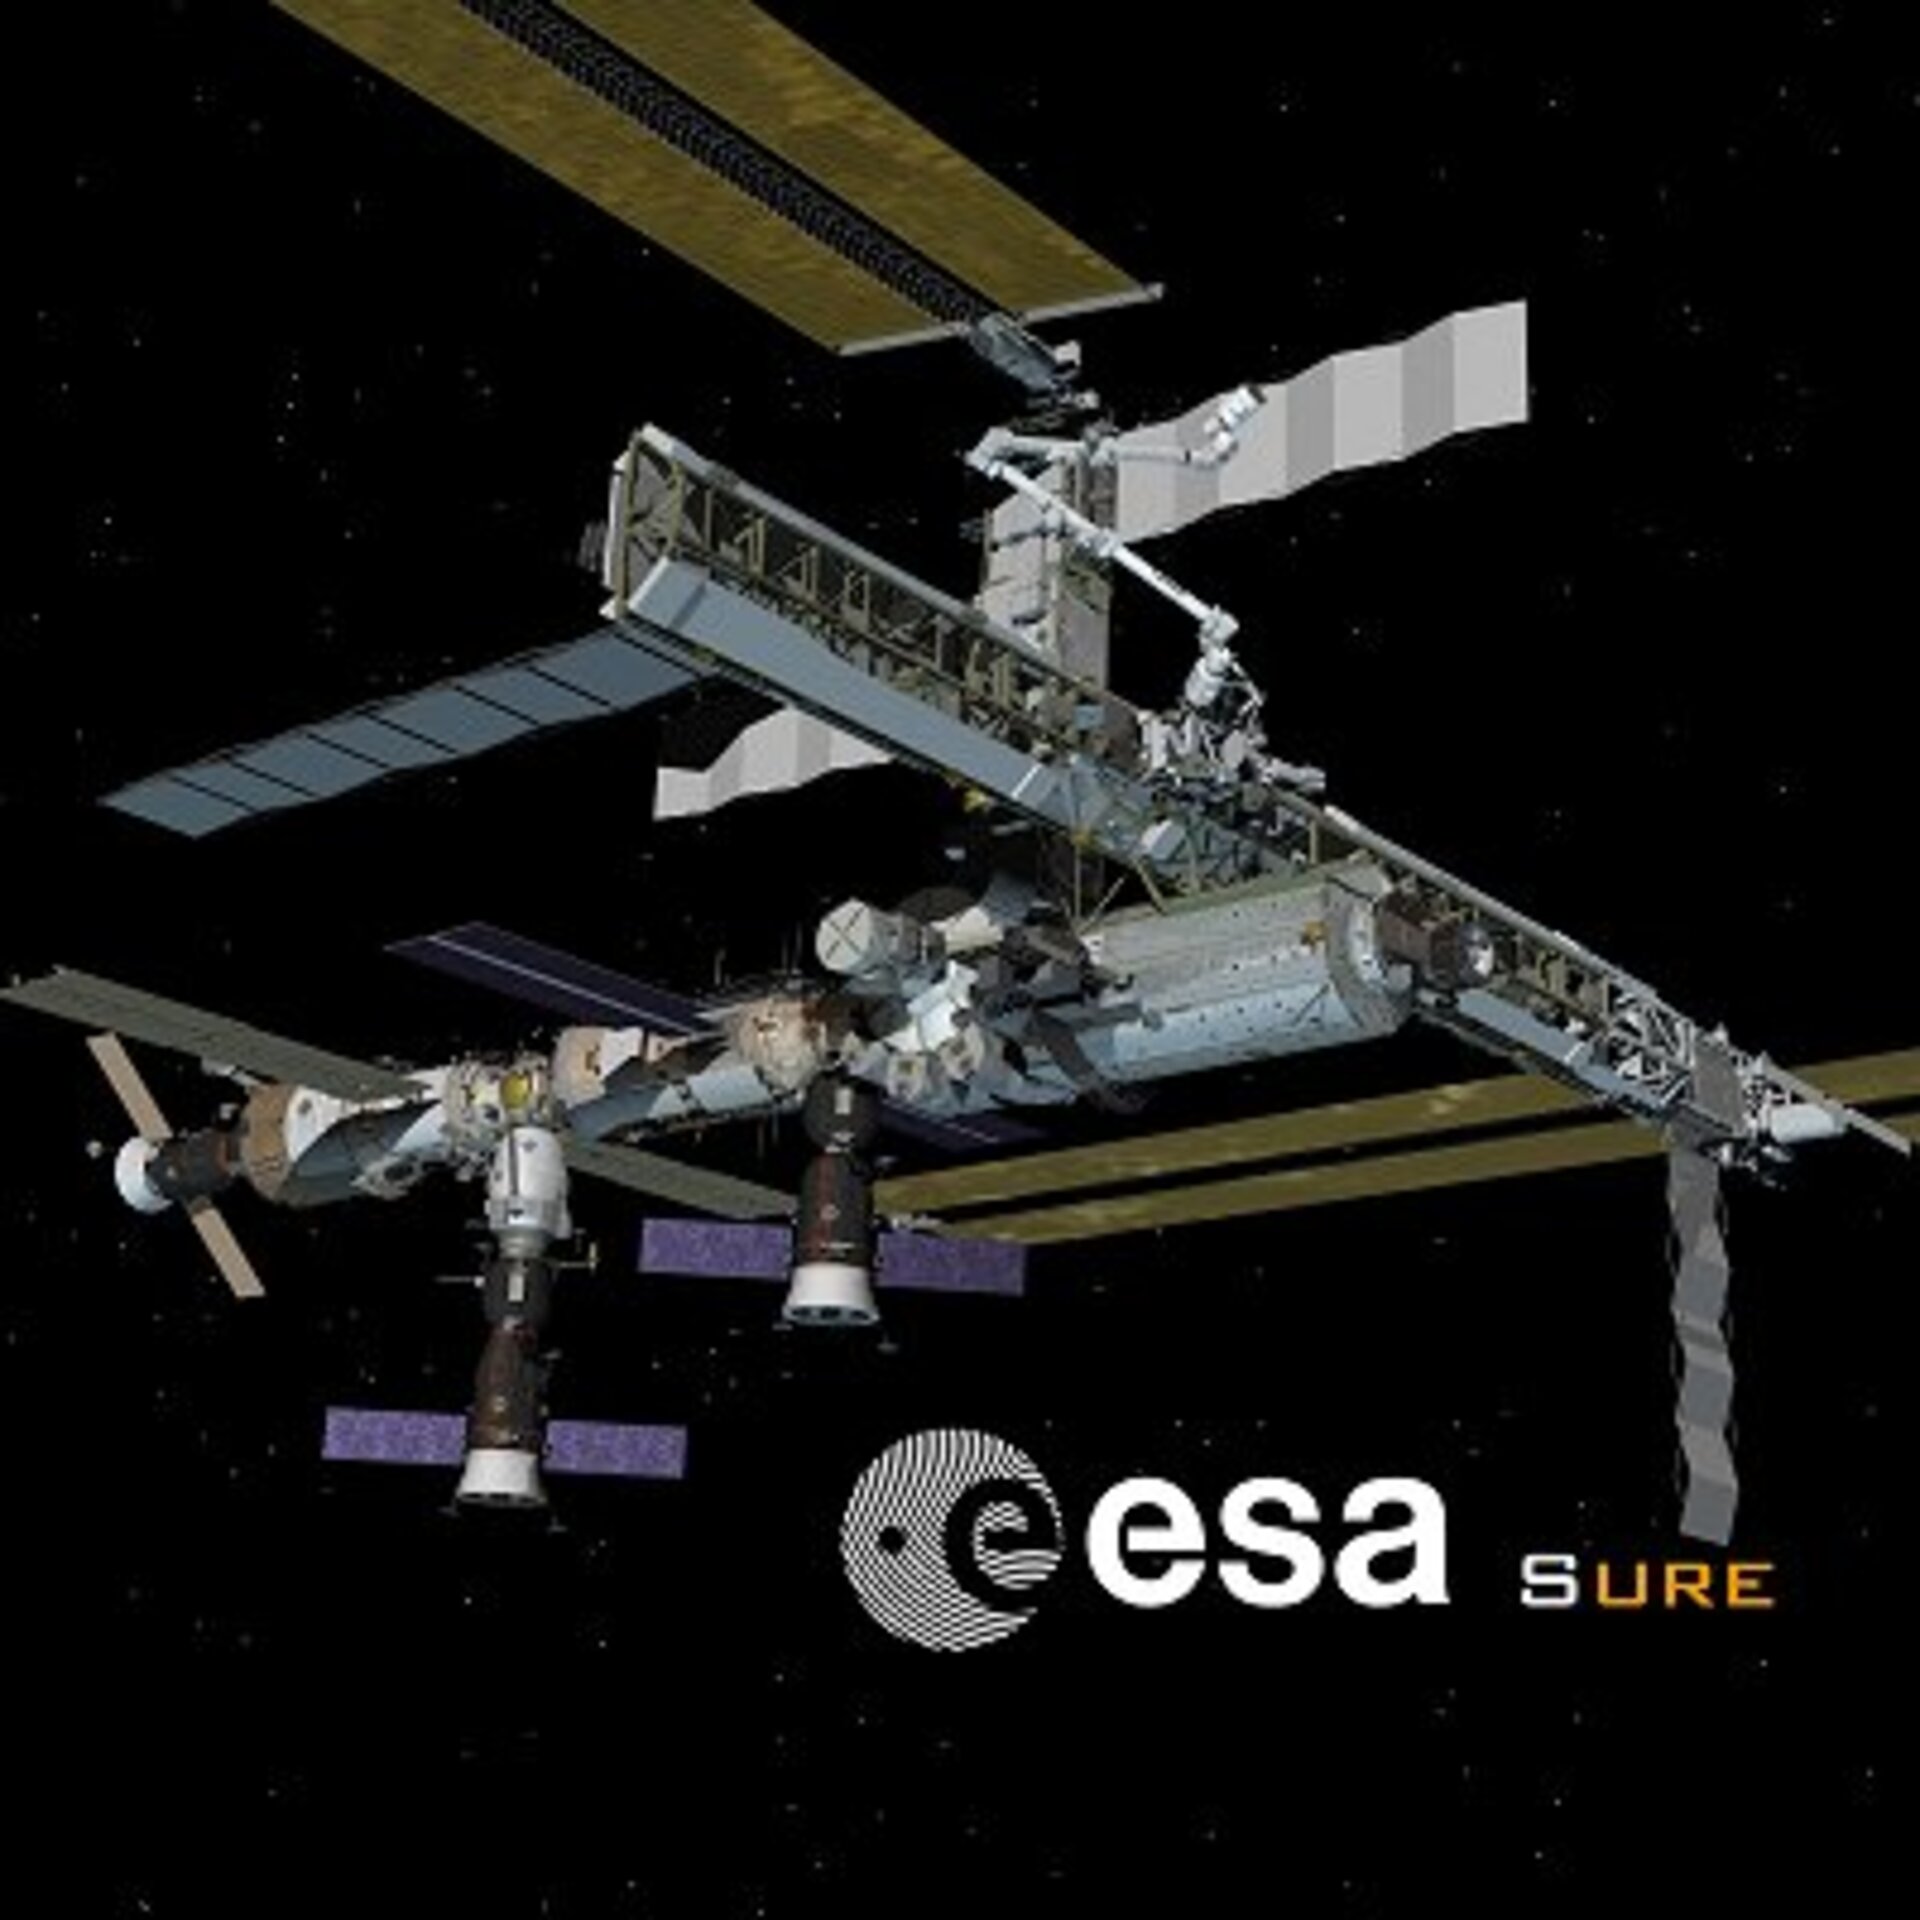 SURE (ISS: A Unique Research Infrastructure)